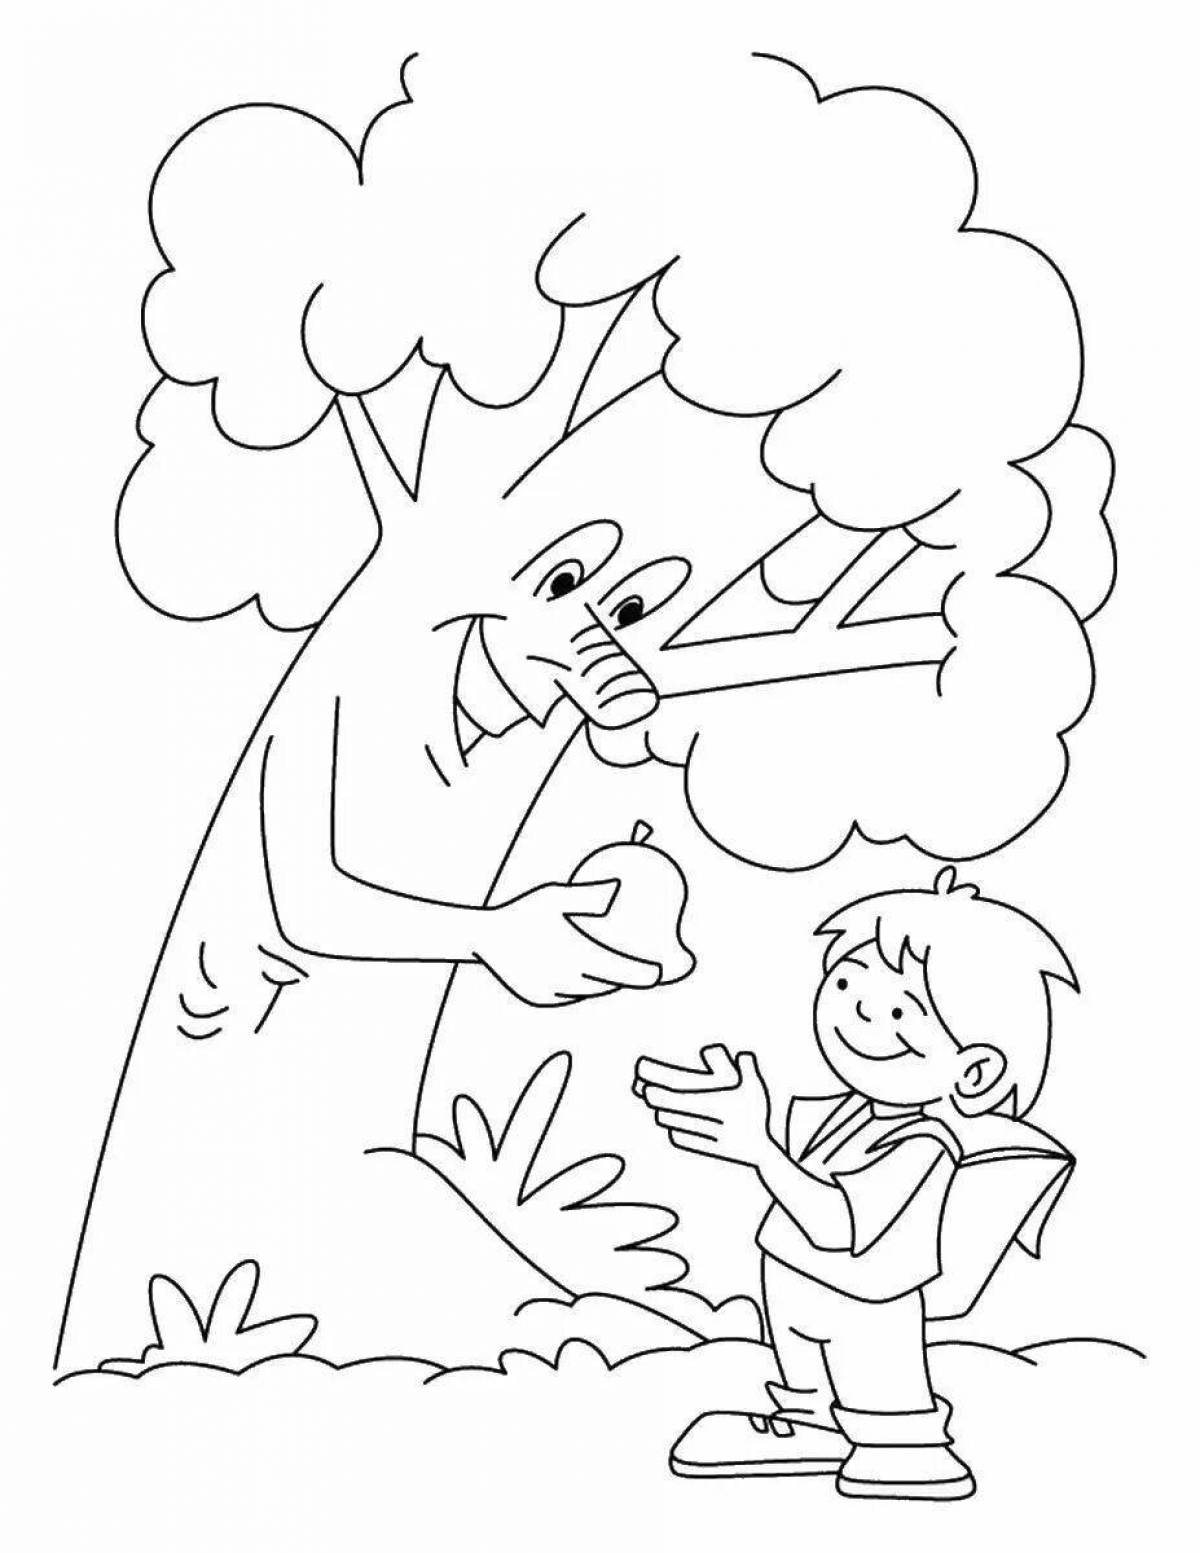 Radiant coloring page rules of conduct in nature